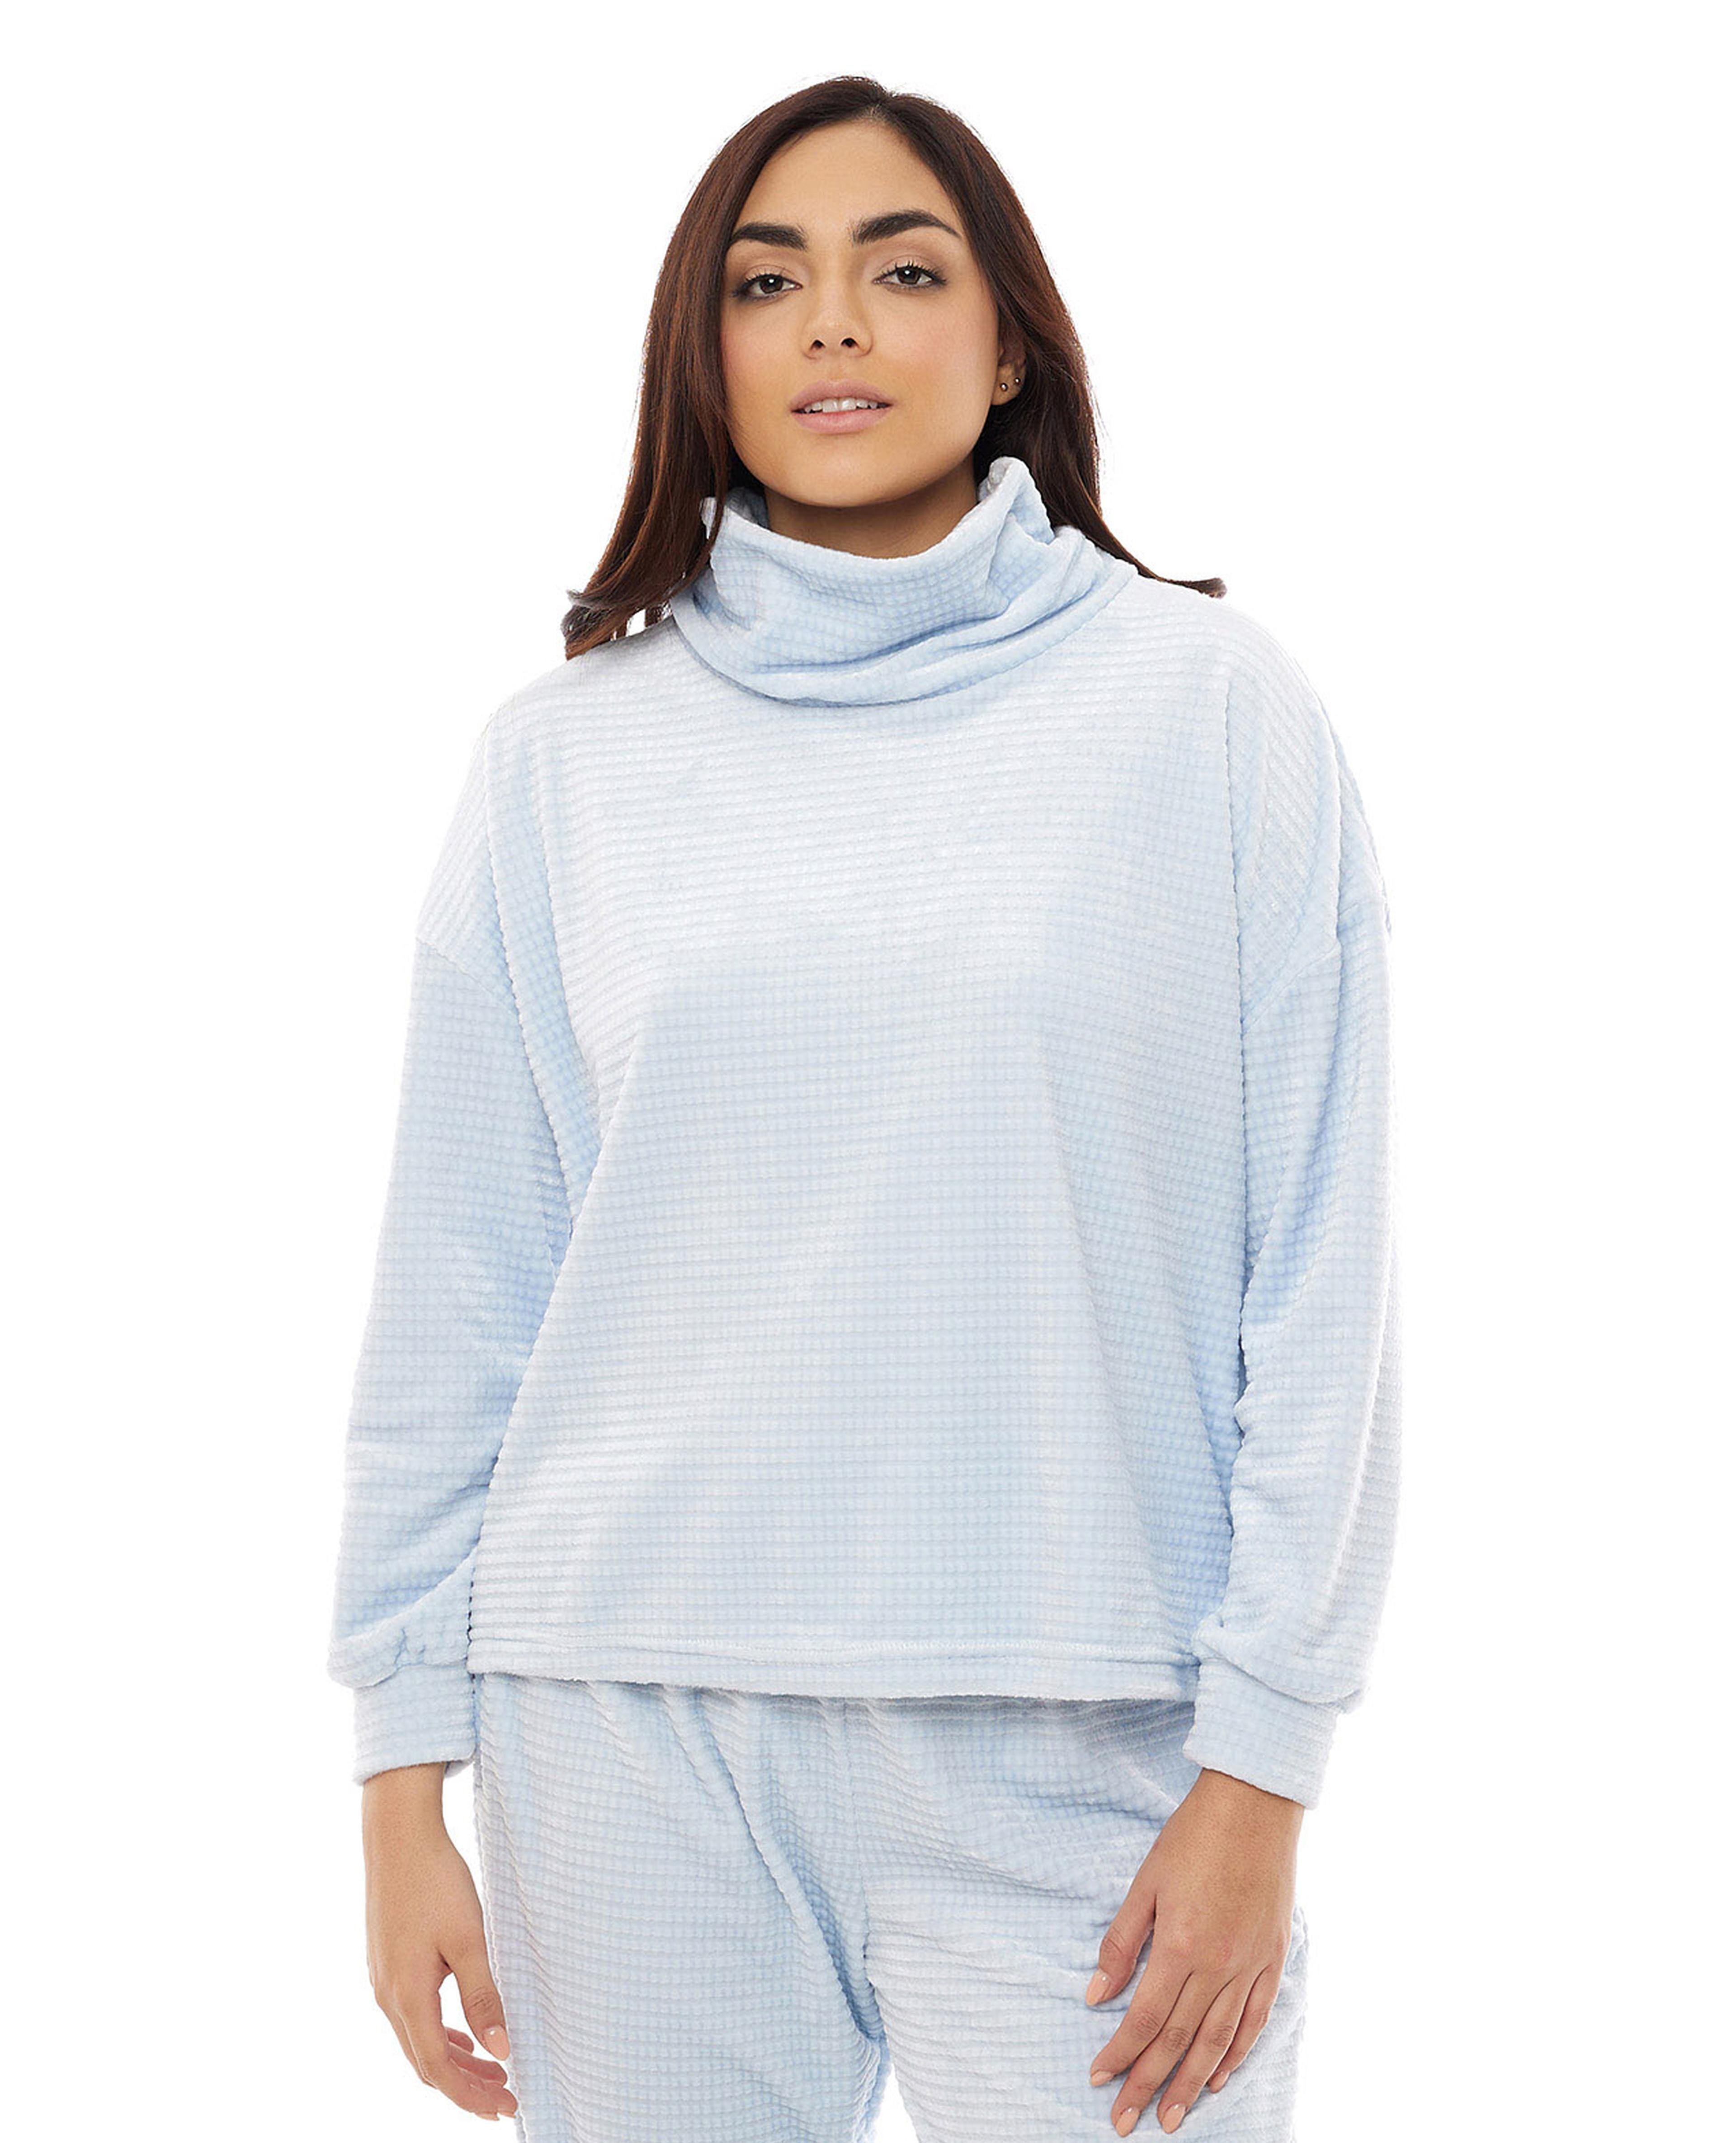 Plush Sleep Top with High Neck and Long Sleeves